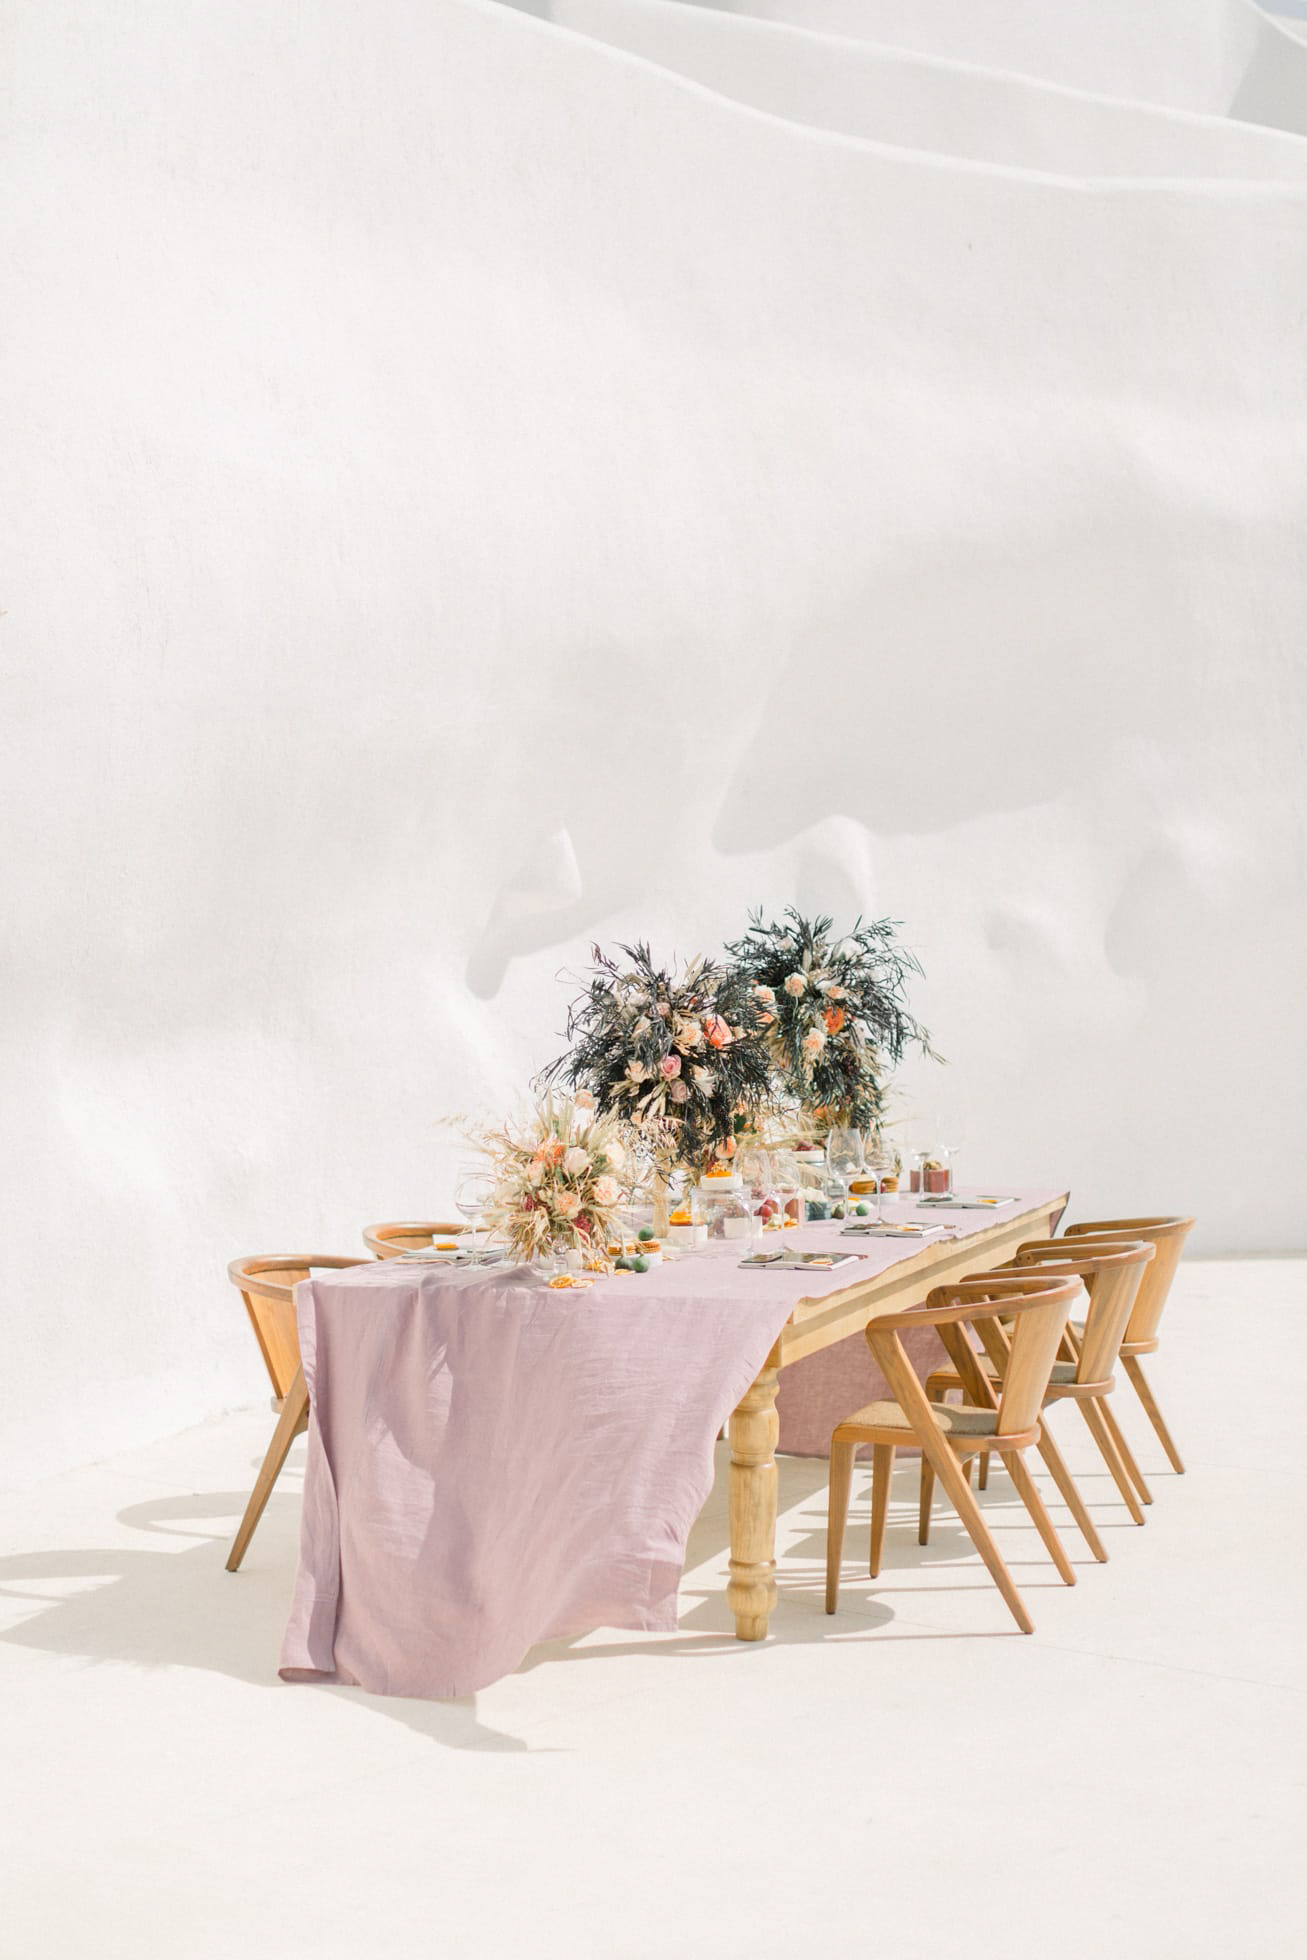 Unique wedding dinner and reception table setup in Santorini accented with stained glass tile menus and pampas grass arrangements.